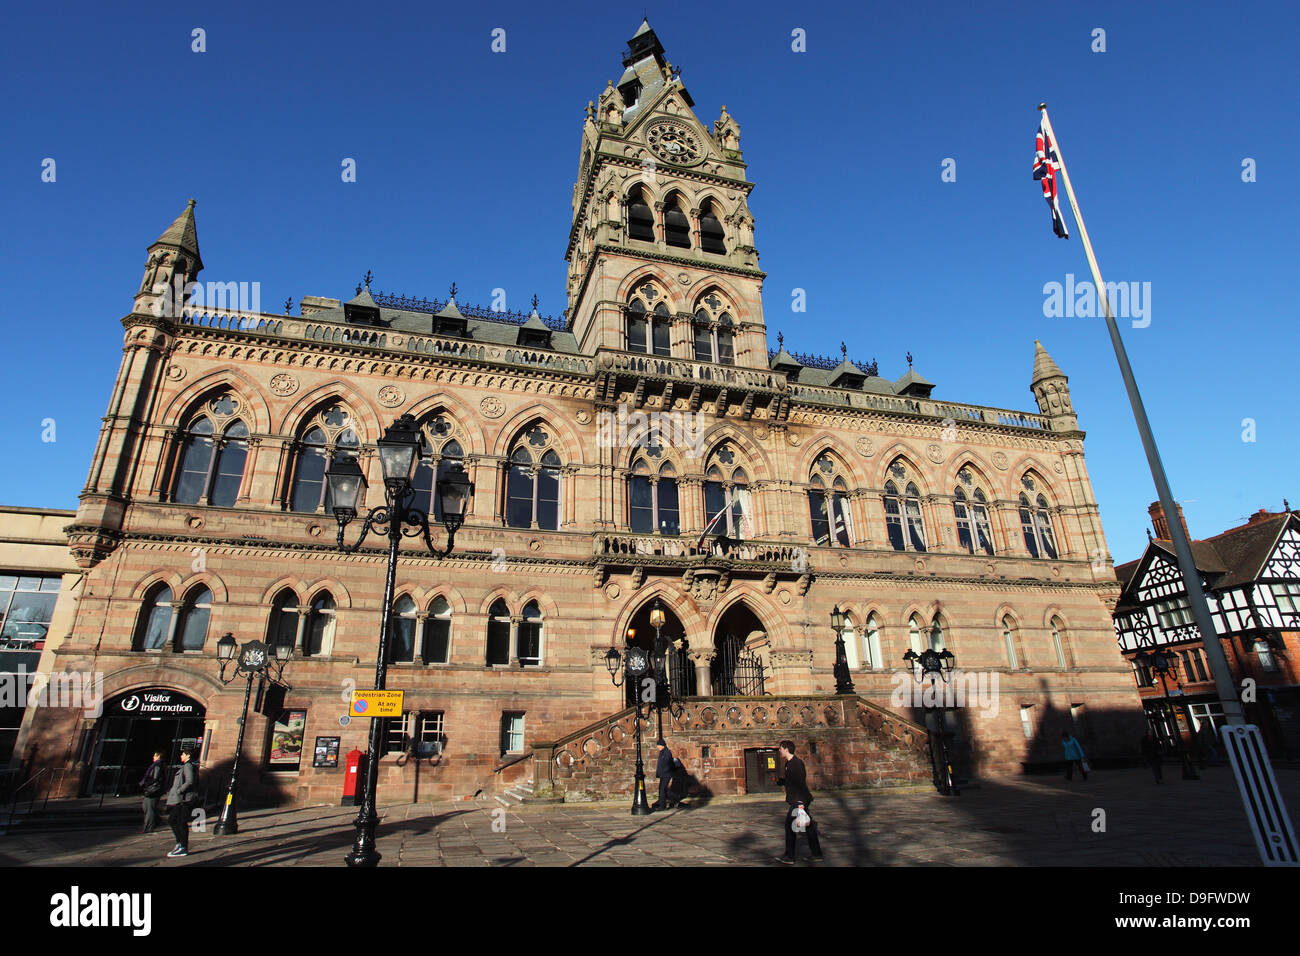 The Victorian Gothic Revival style town hall, designed by William Henry Lynn, in Chester, Cheshire, England, UK Stock Photo